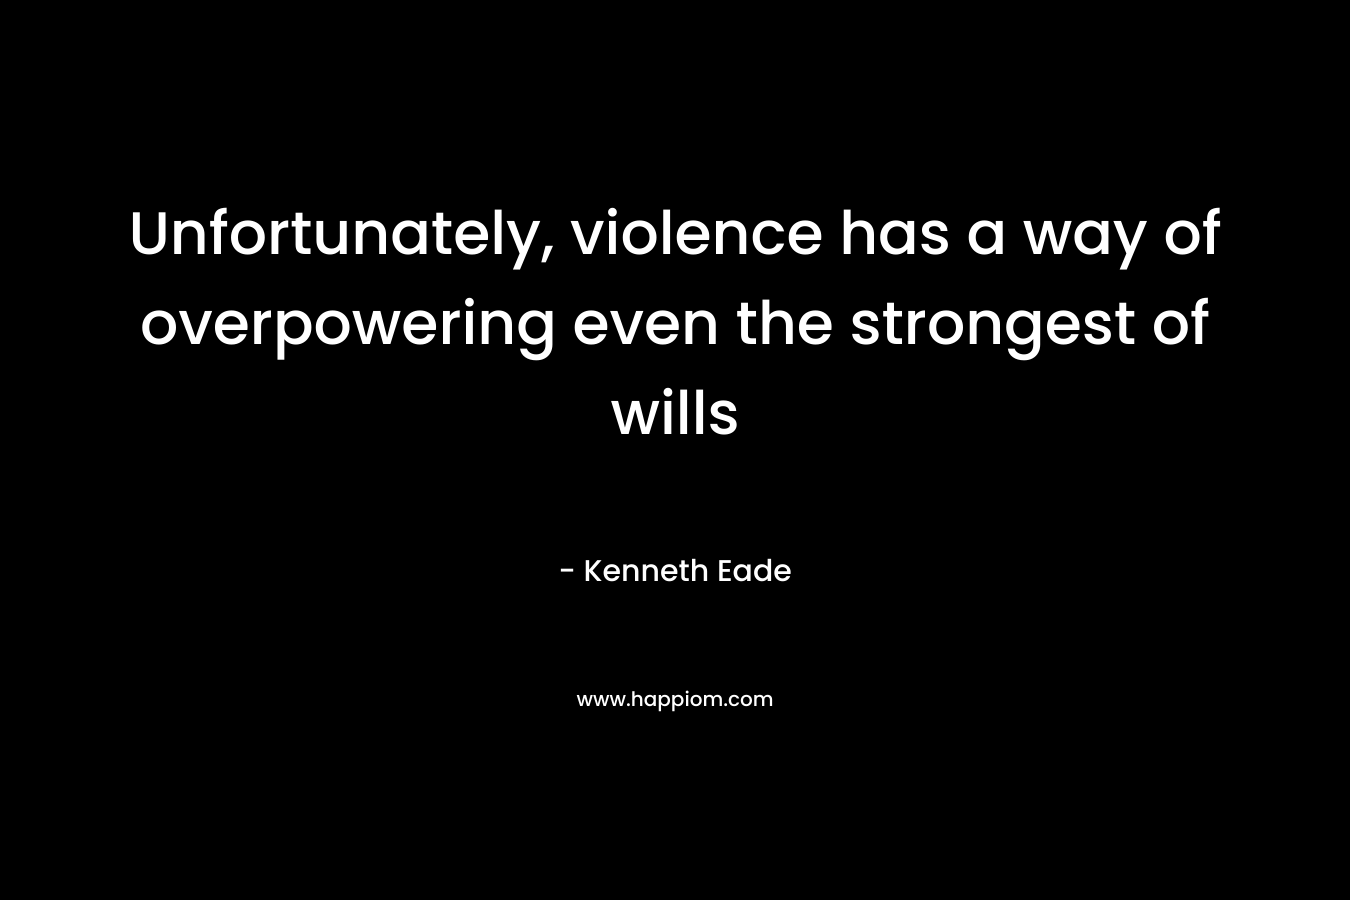 Unfortunately, violence has a way of overpowering even the strongest of wills – Kenneth Eade